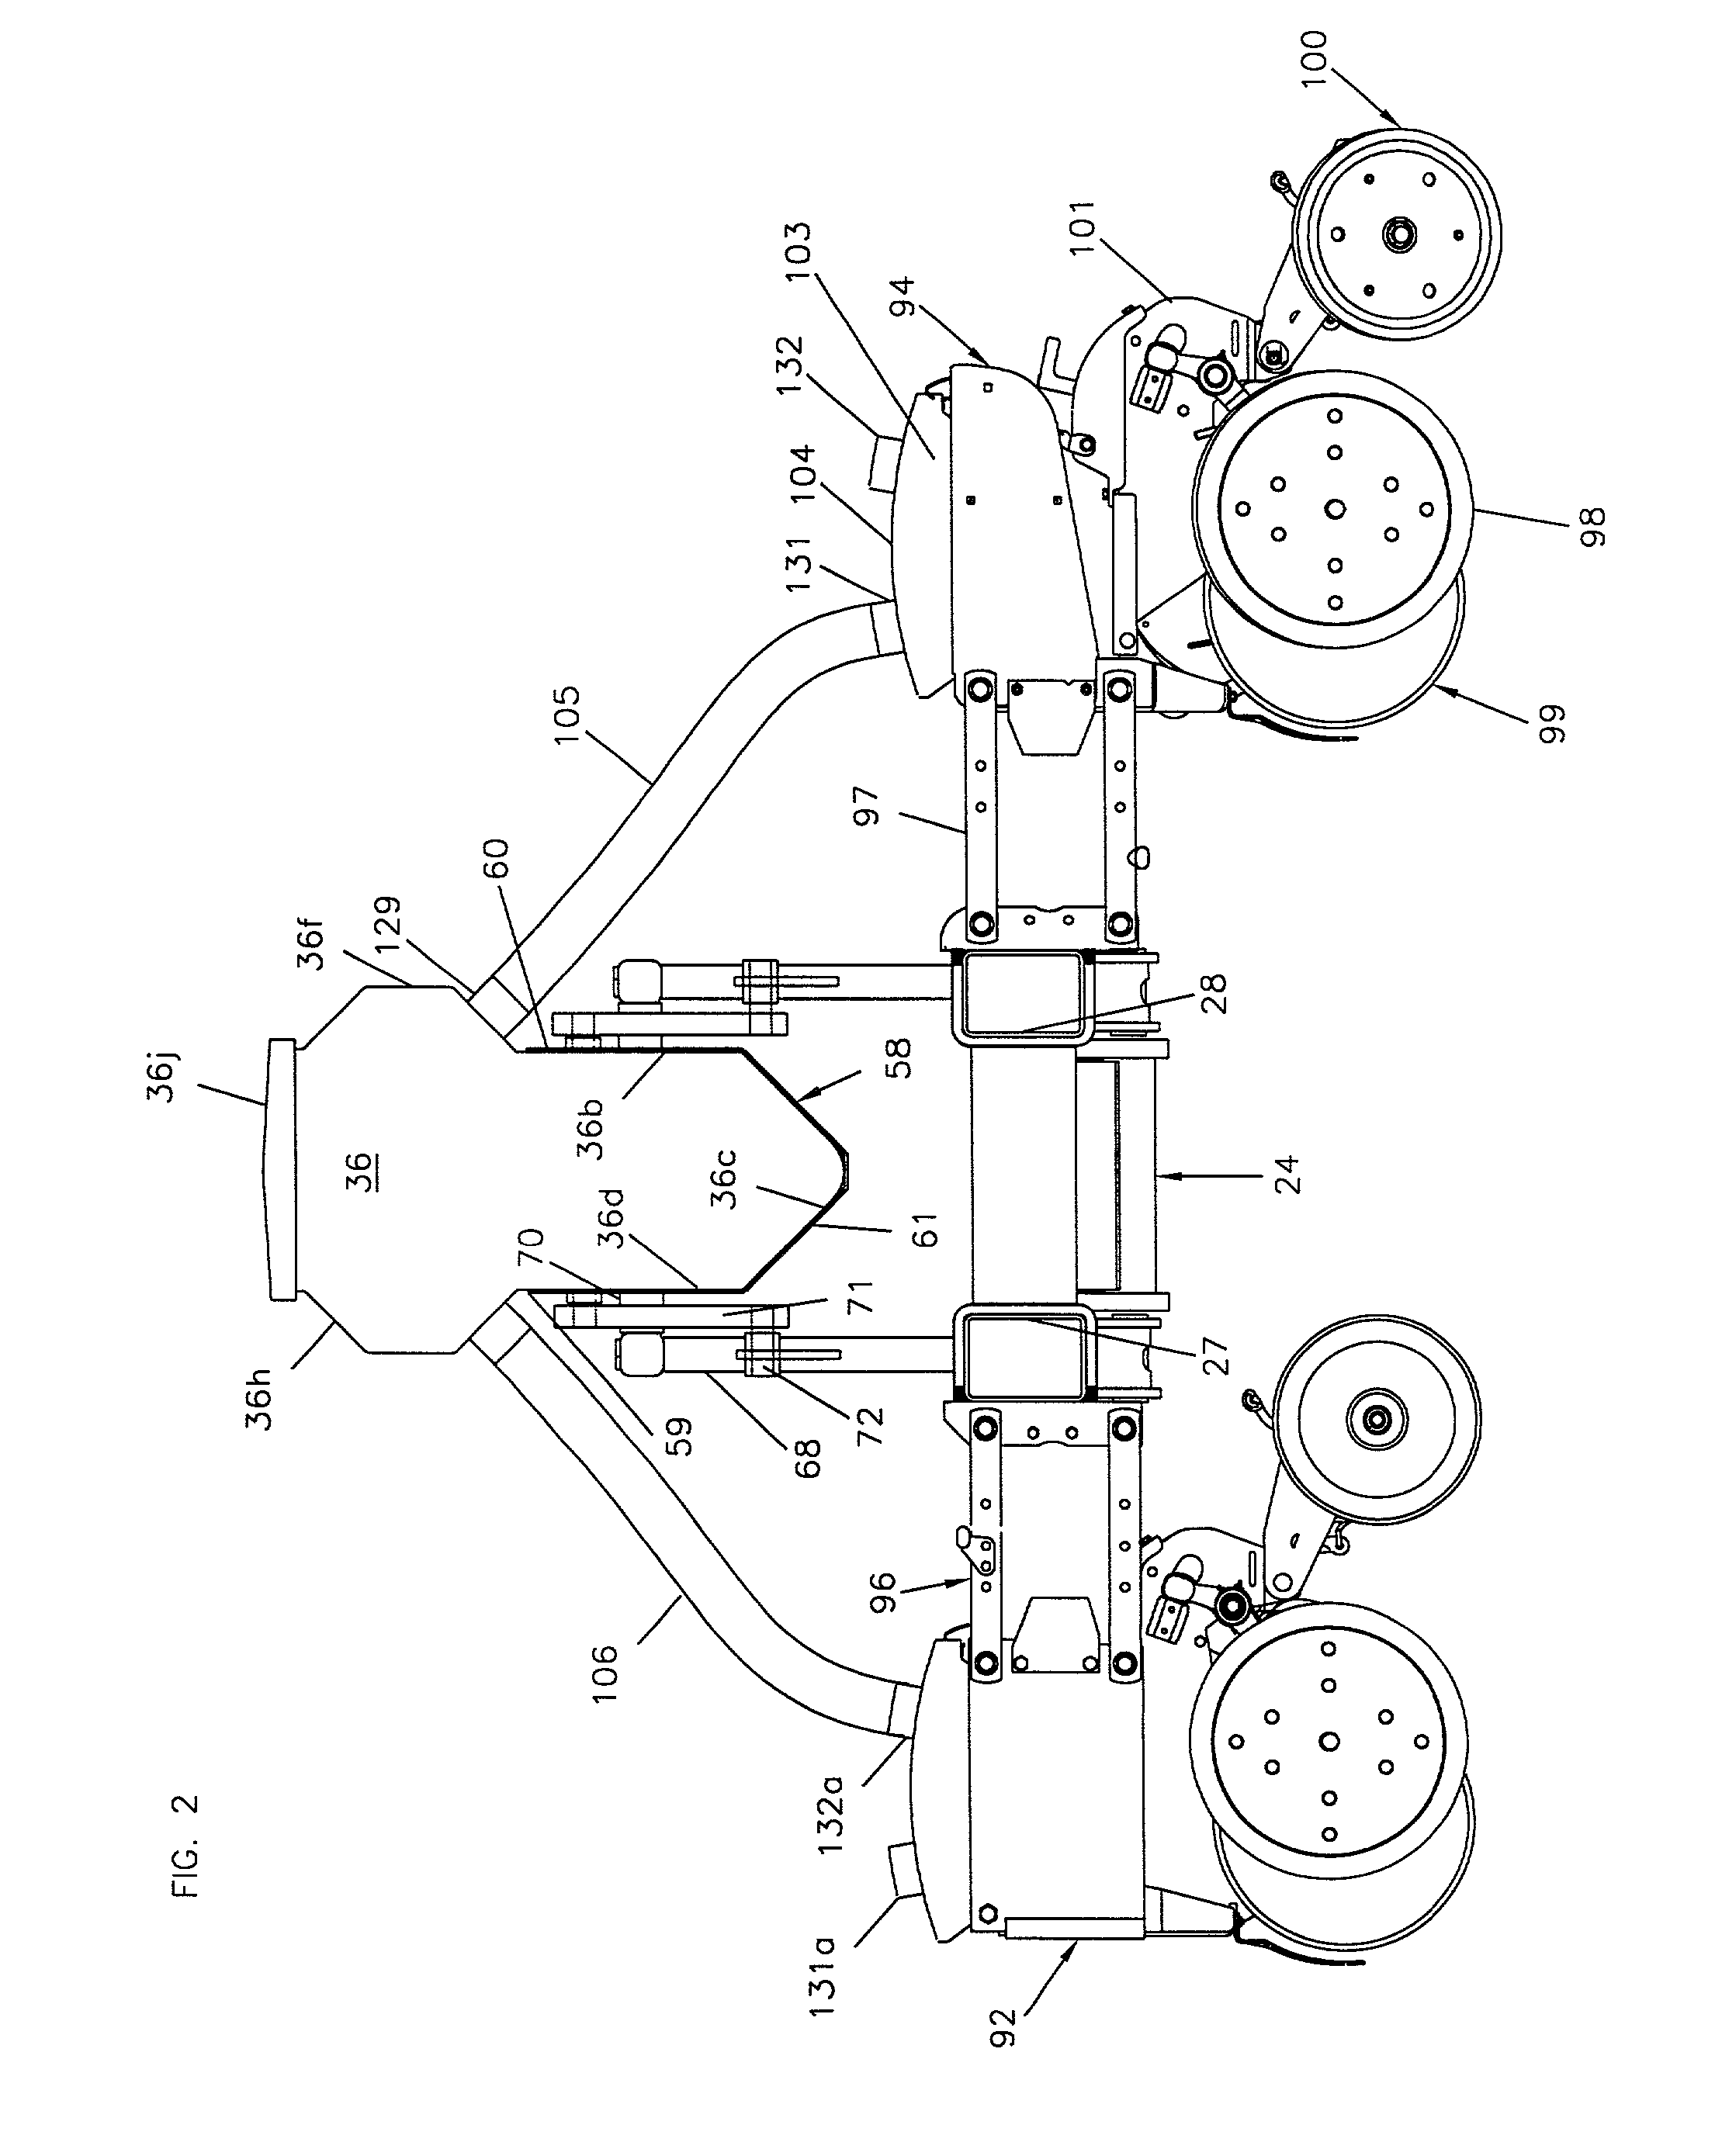 Centralized seed distribution system for planter